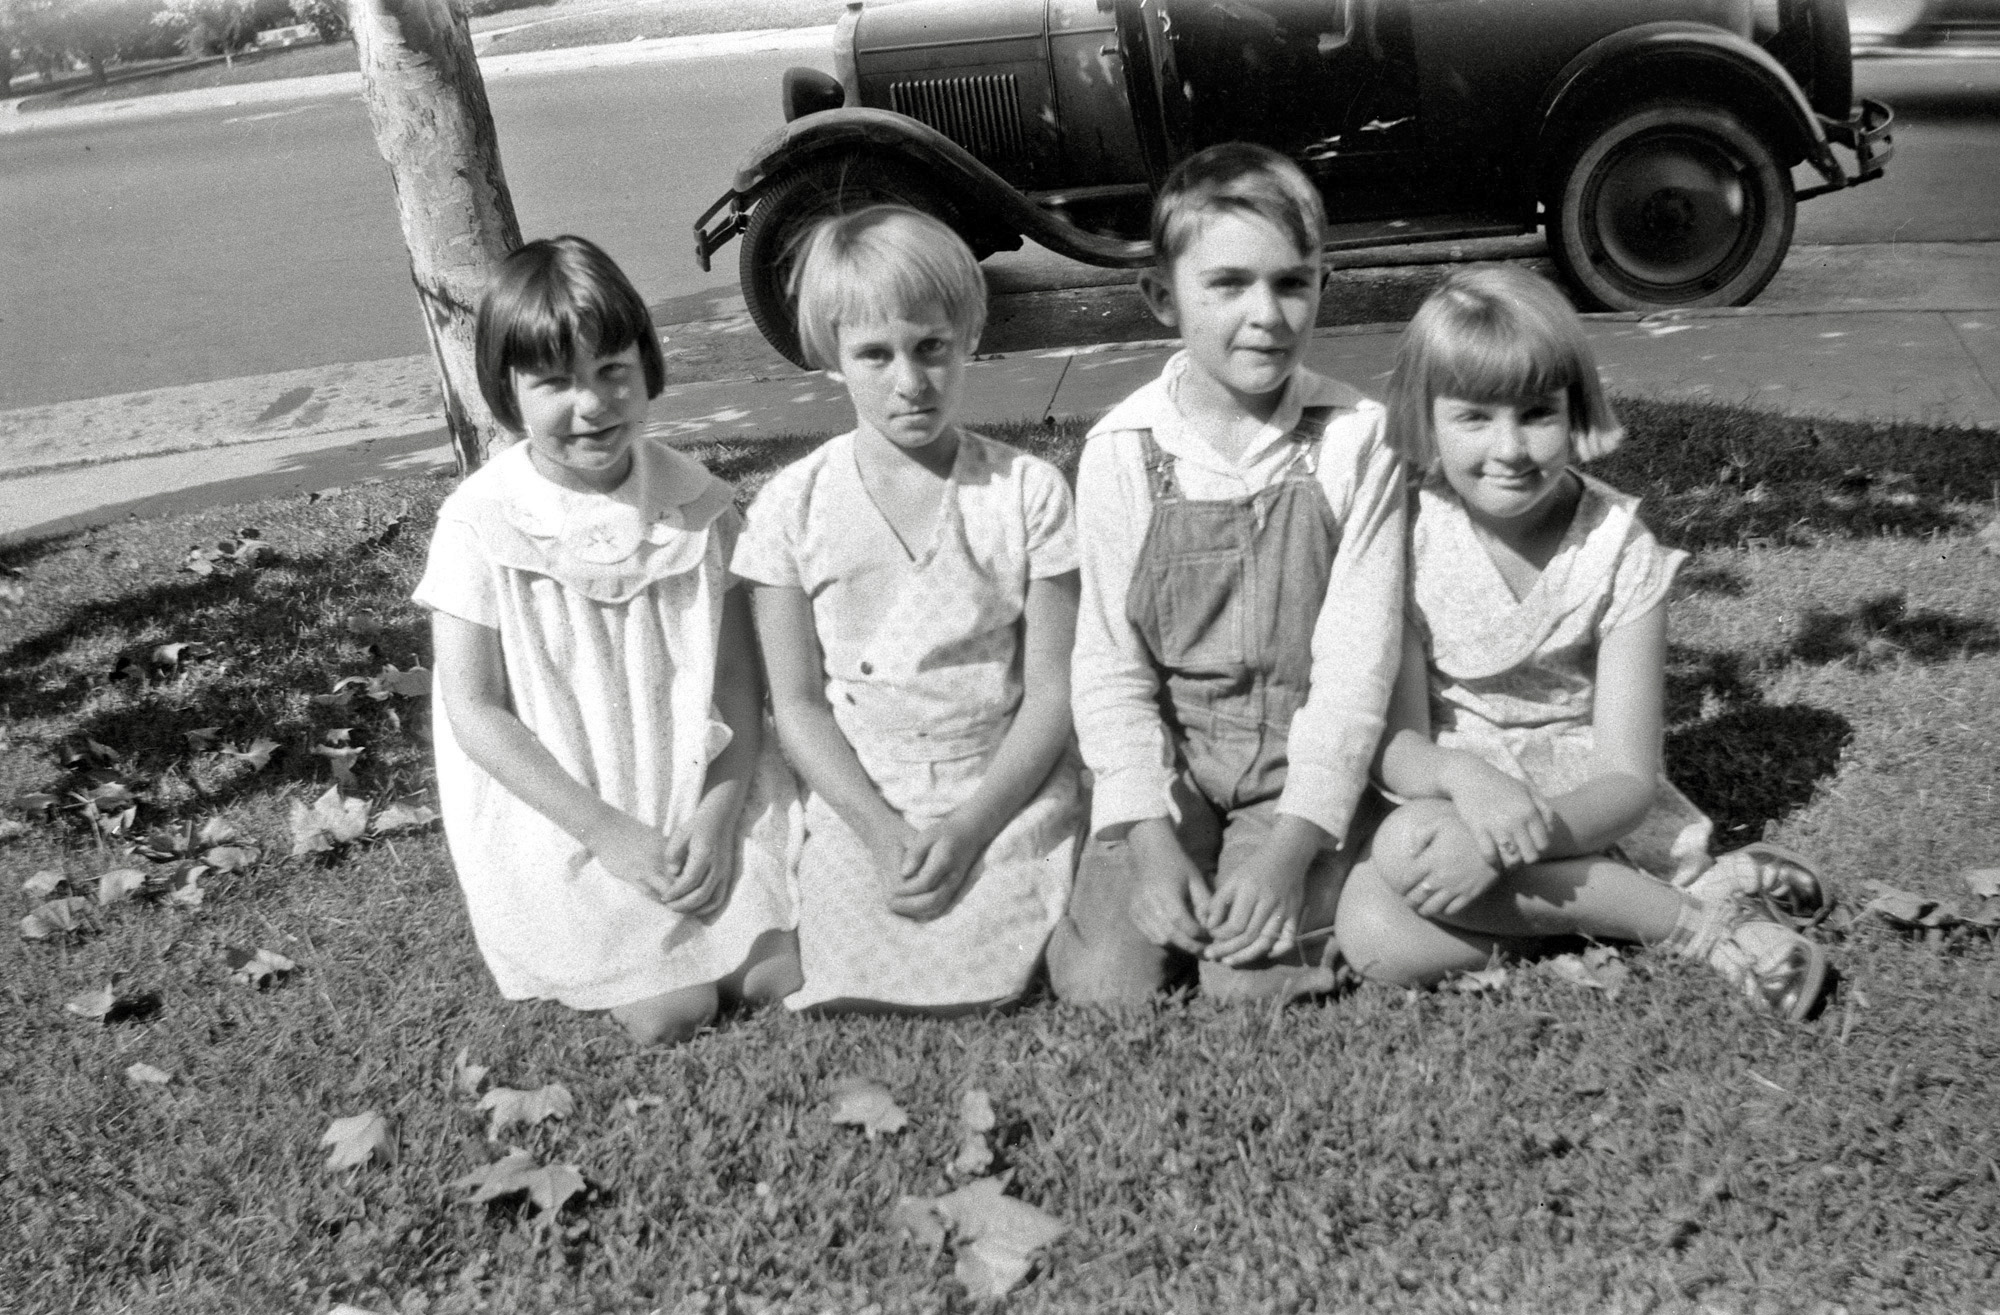 The second from the left seems to be the same little girl as in the Essex car photo, she has the same dour look as her mom. View full size.